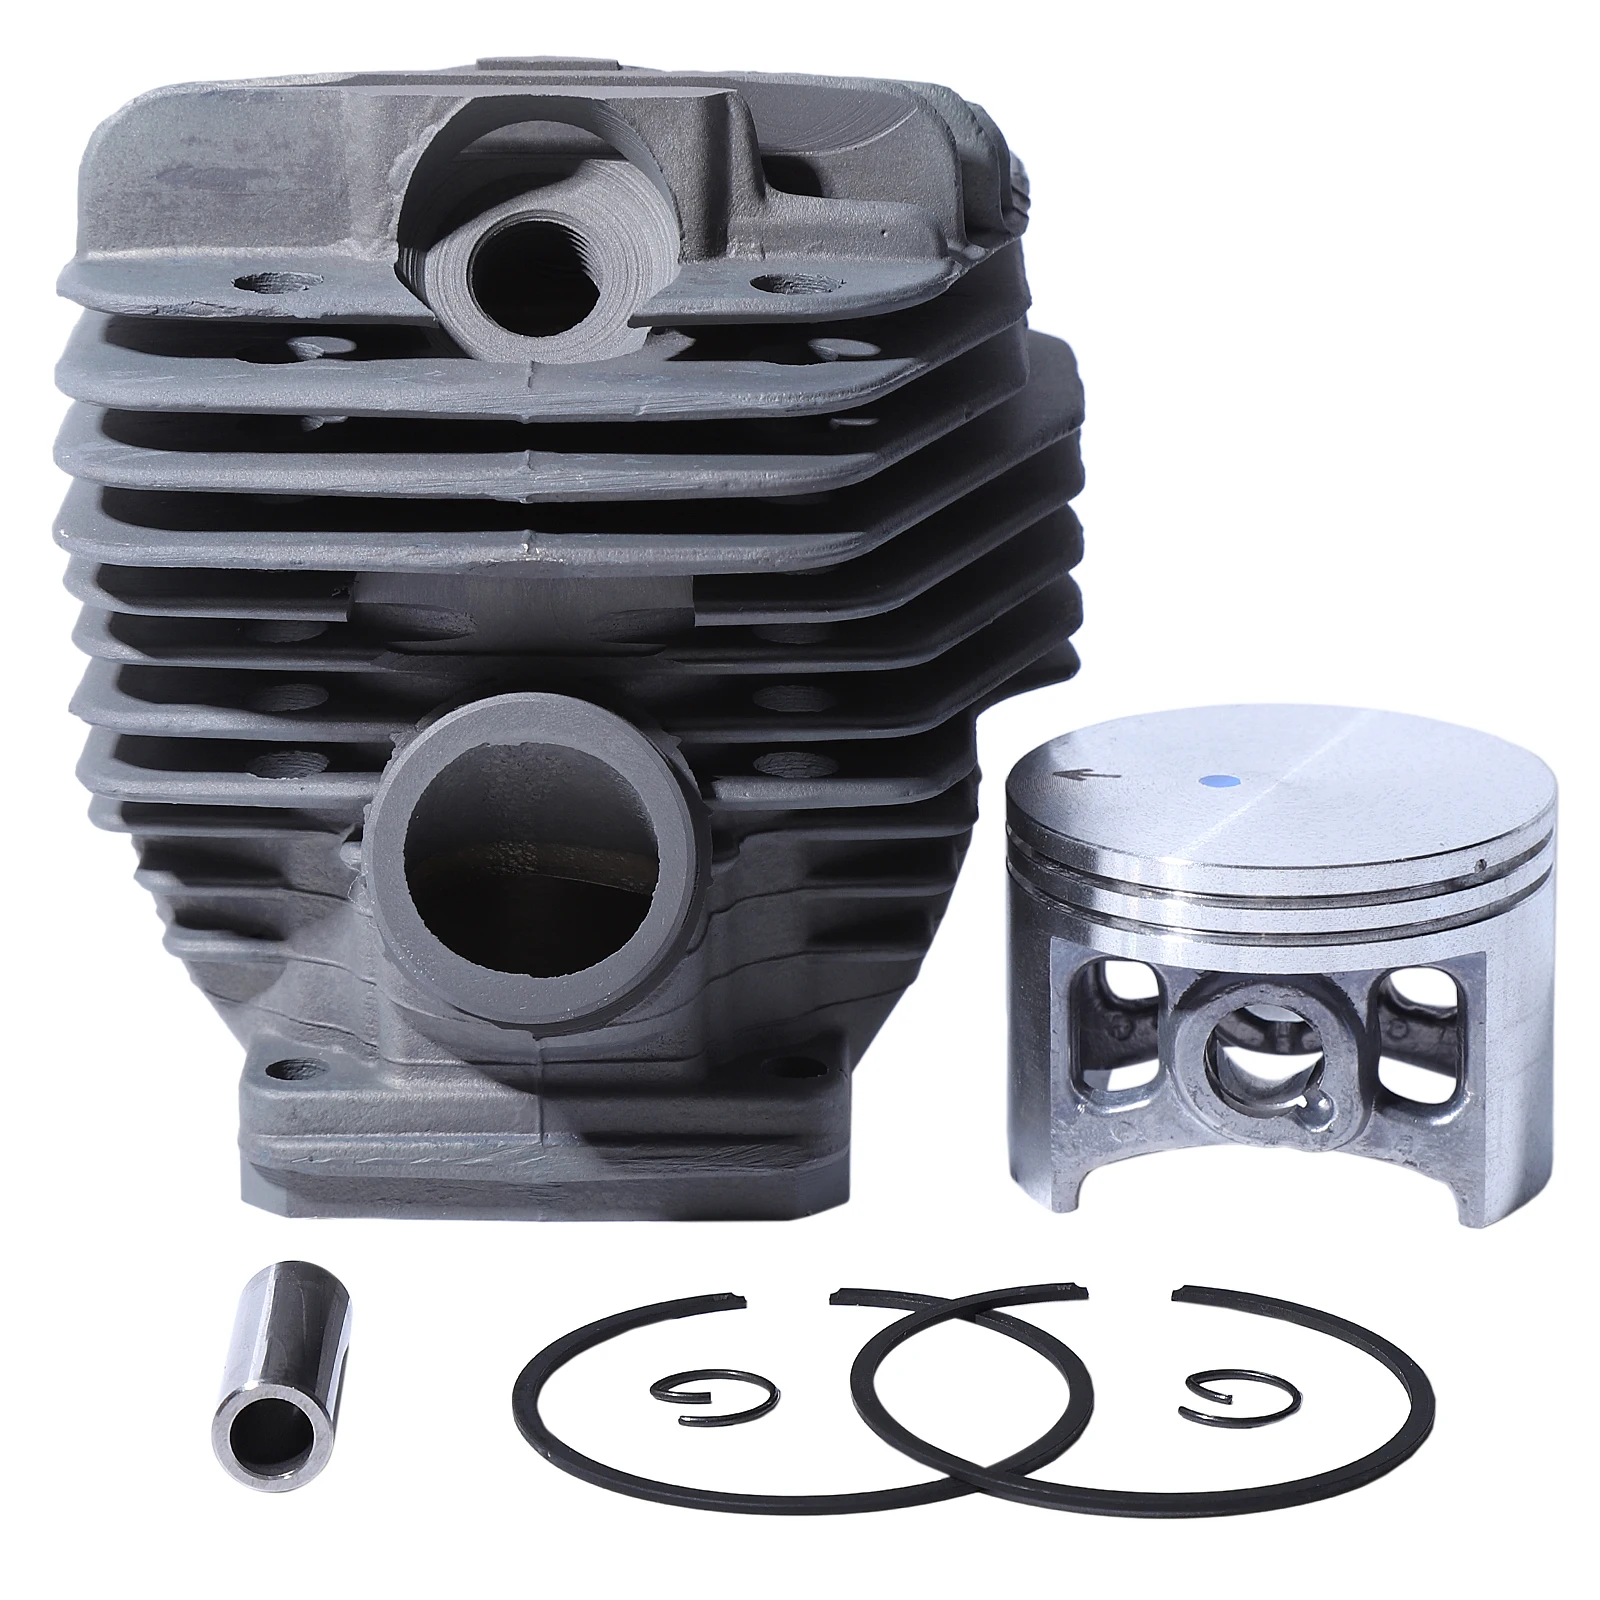 

56mm Cylinder Piston Set Fit For Stihl MS660 MS 066 Big Bore Gas Chainsaw Spare Parts Replace Part No.1122 020 1211